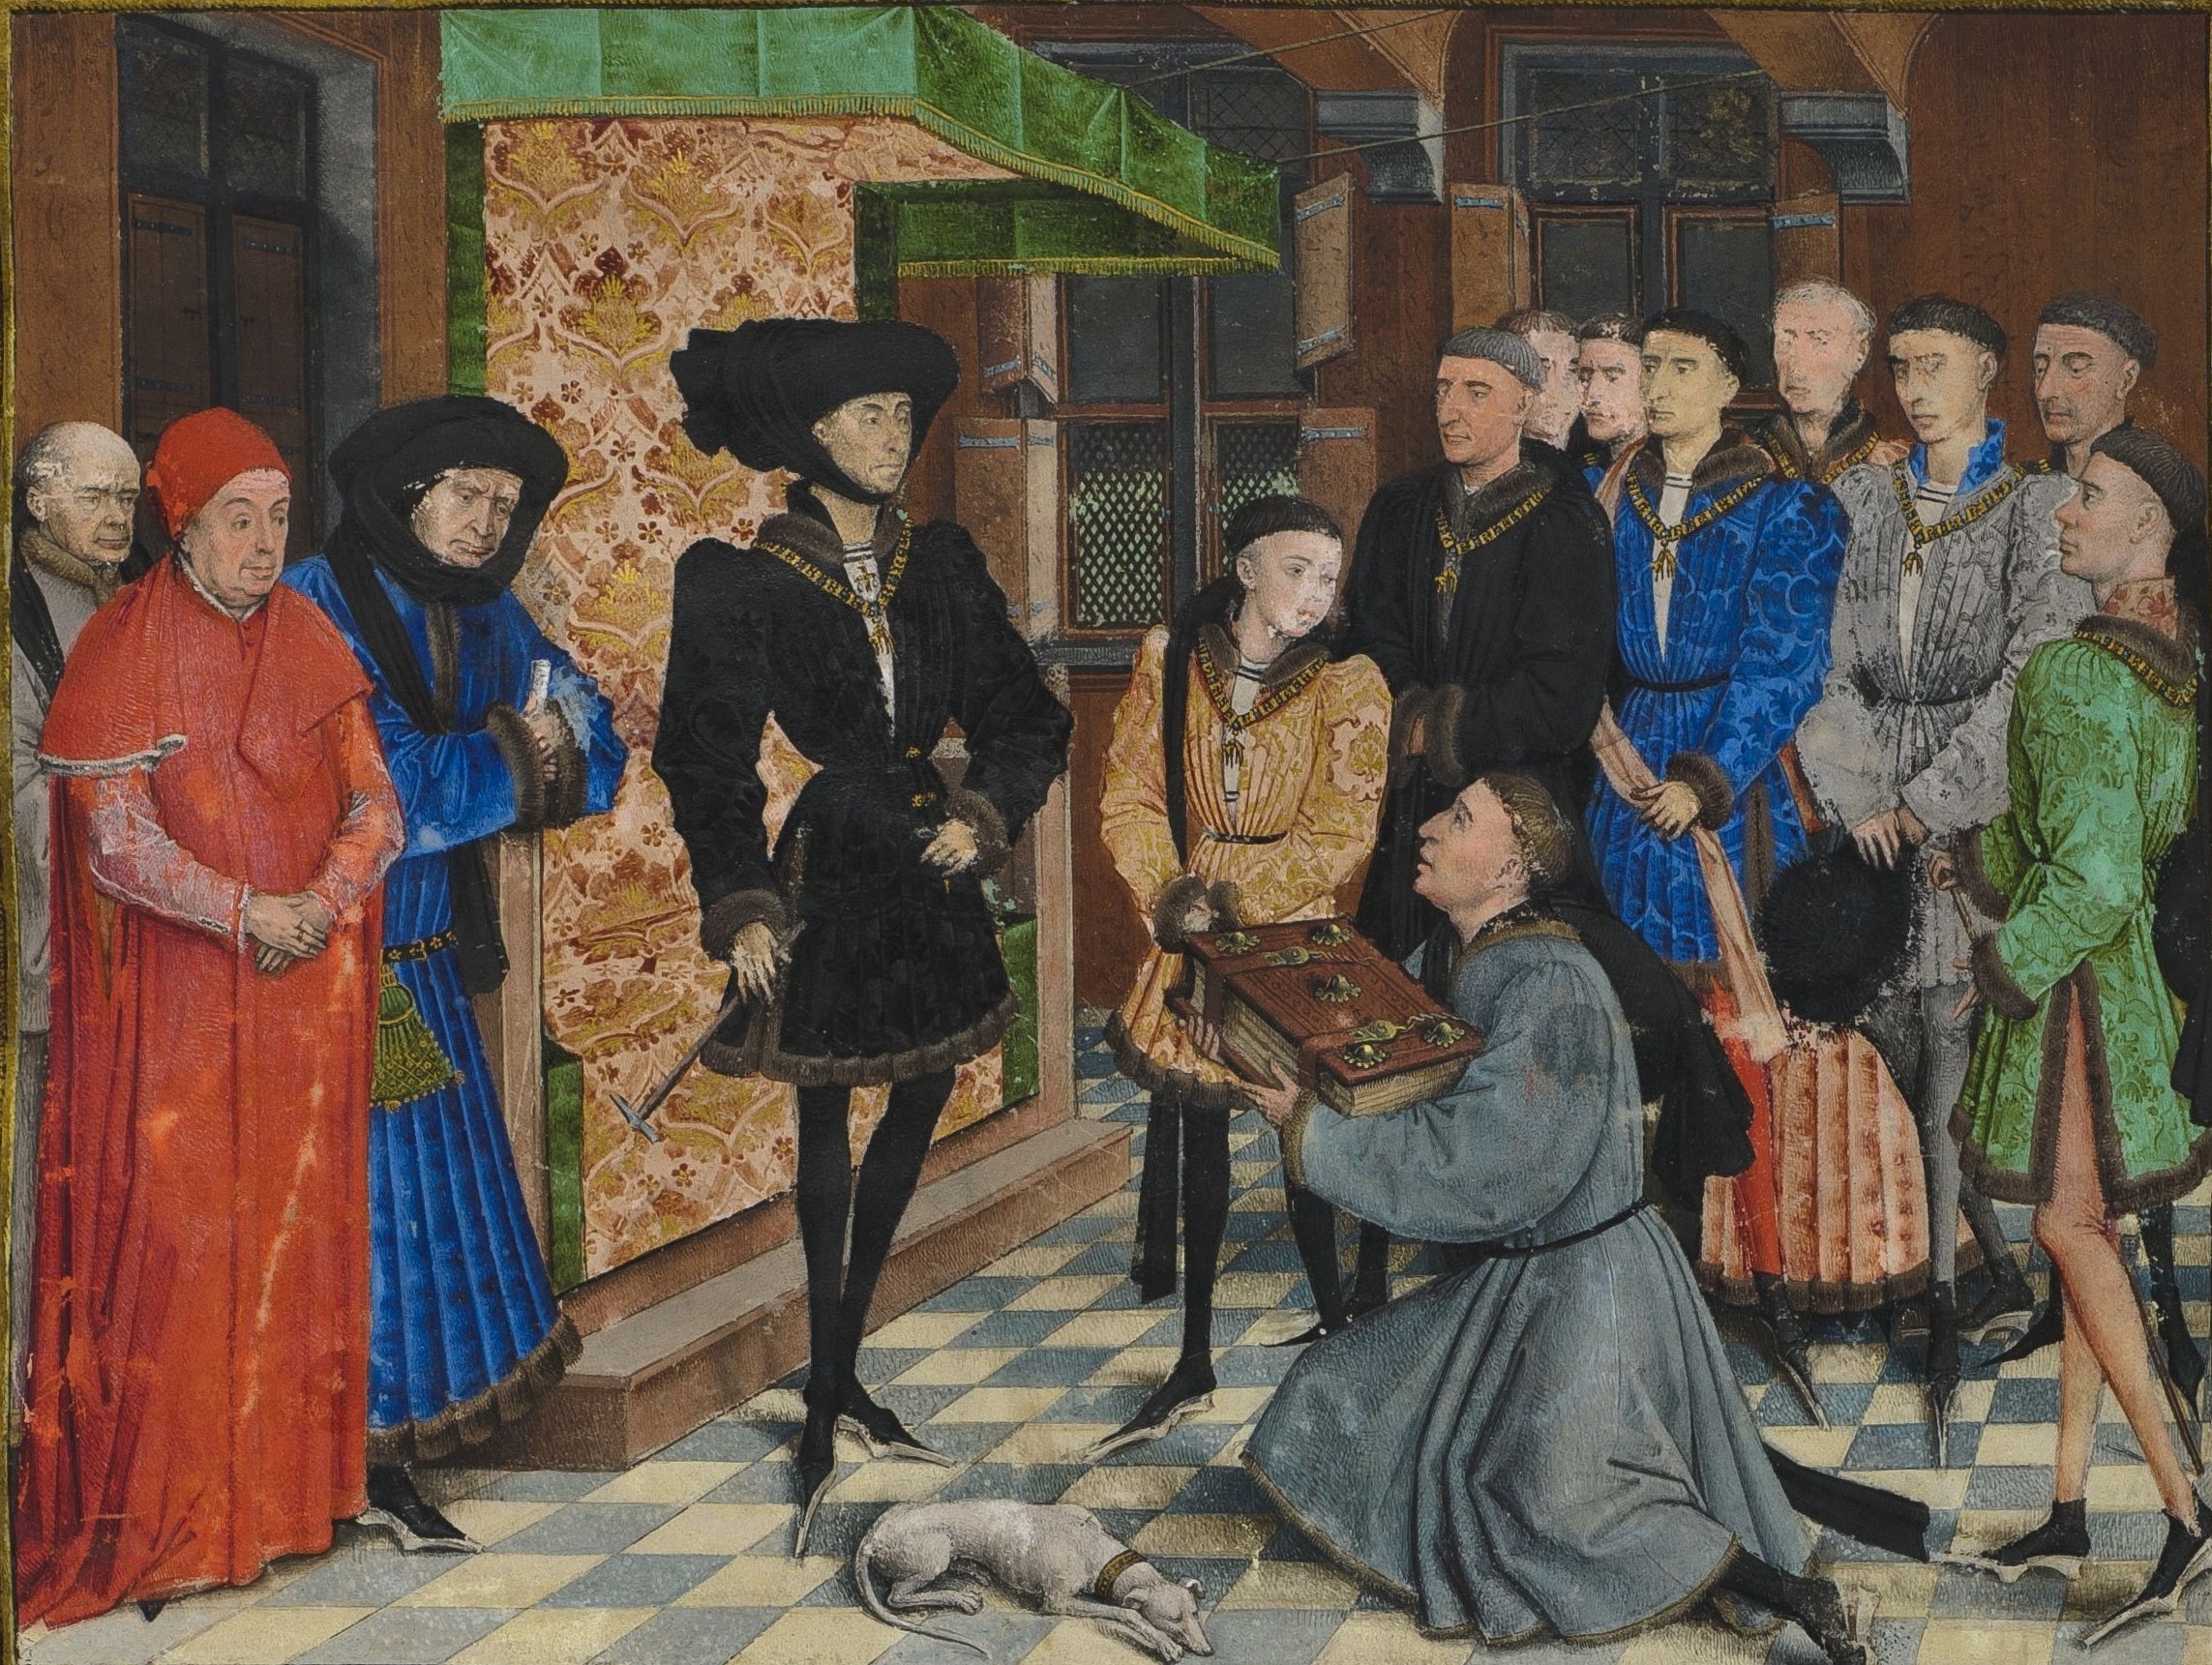 Medieval illustration of kneeling man in gray clothes handing a book to a noble man in black clothes. Other dignitaries stand around. A dog rests on the floor.